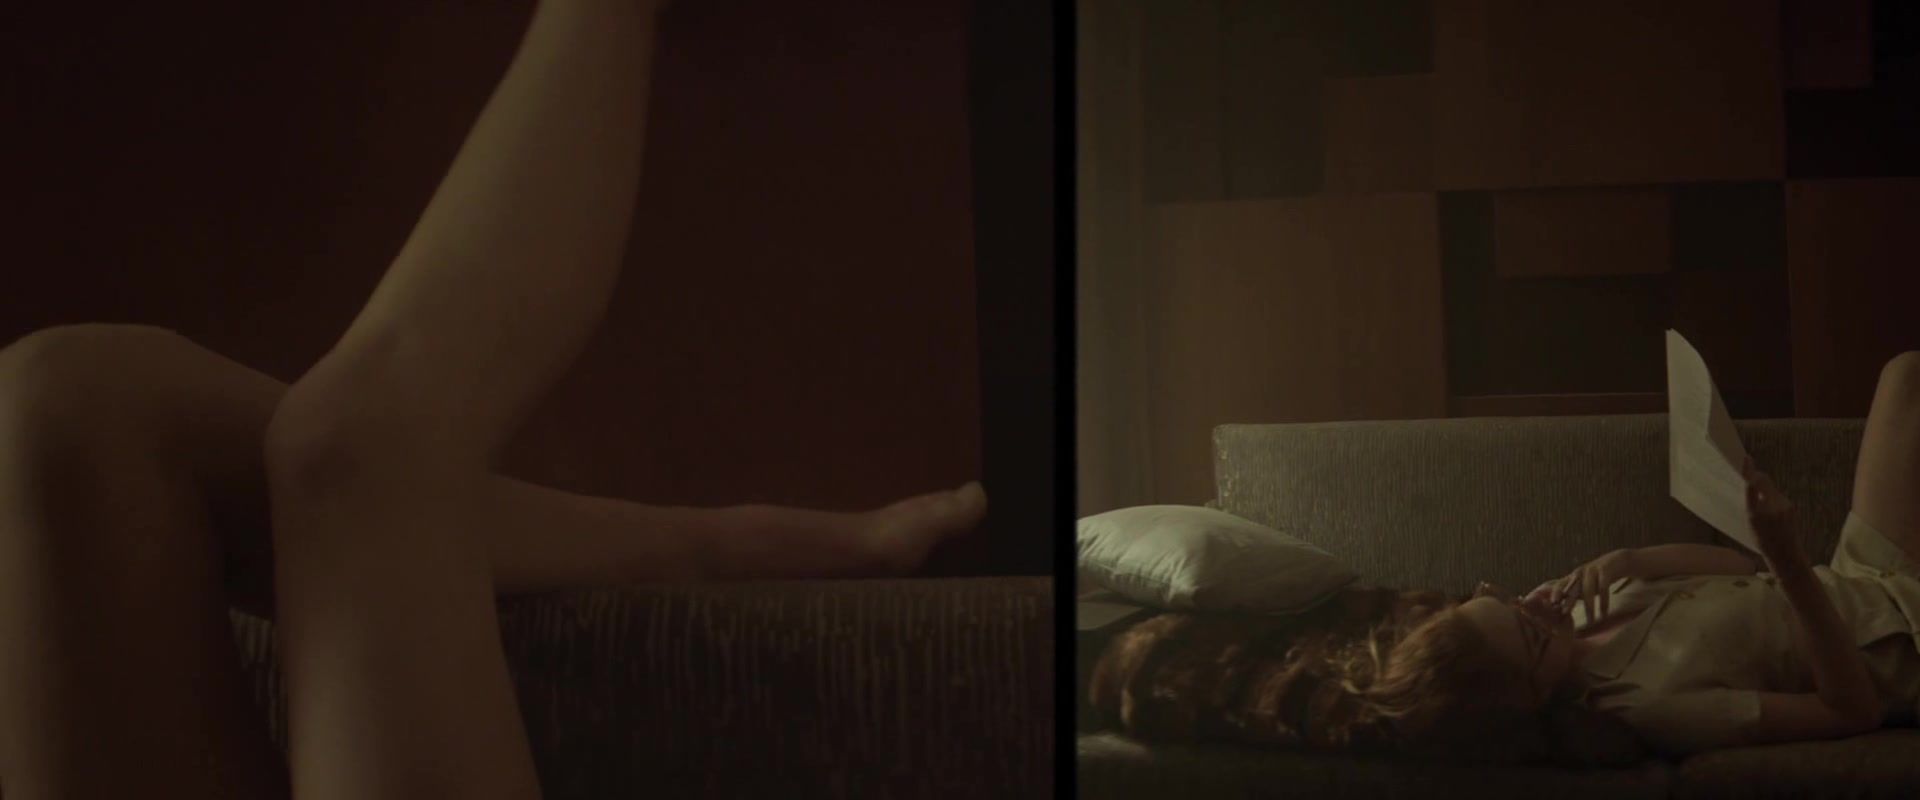 Bersek Naked Freya Mavor, Stacy Martin - The Lady In The Car With Glasses & A Gun (2015) (Sex, Topless Scenes) Pervs - 1